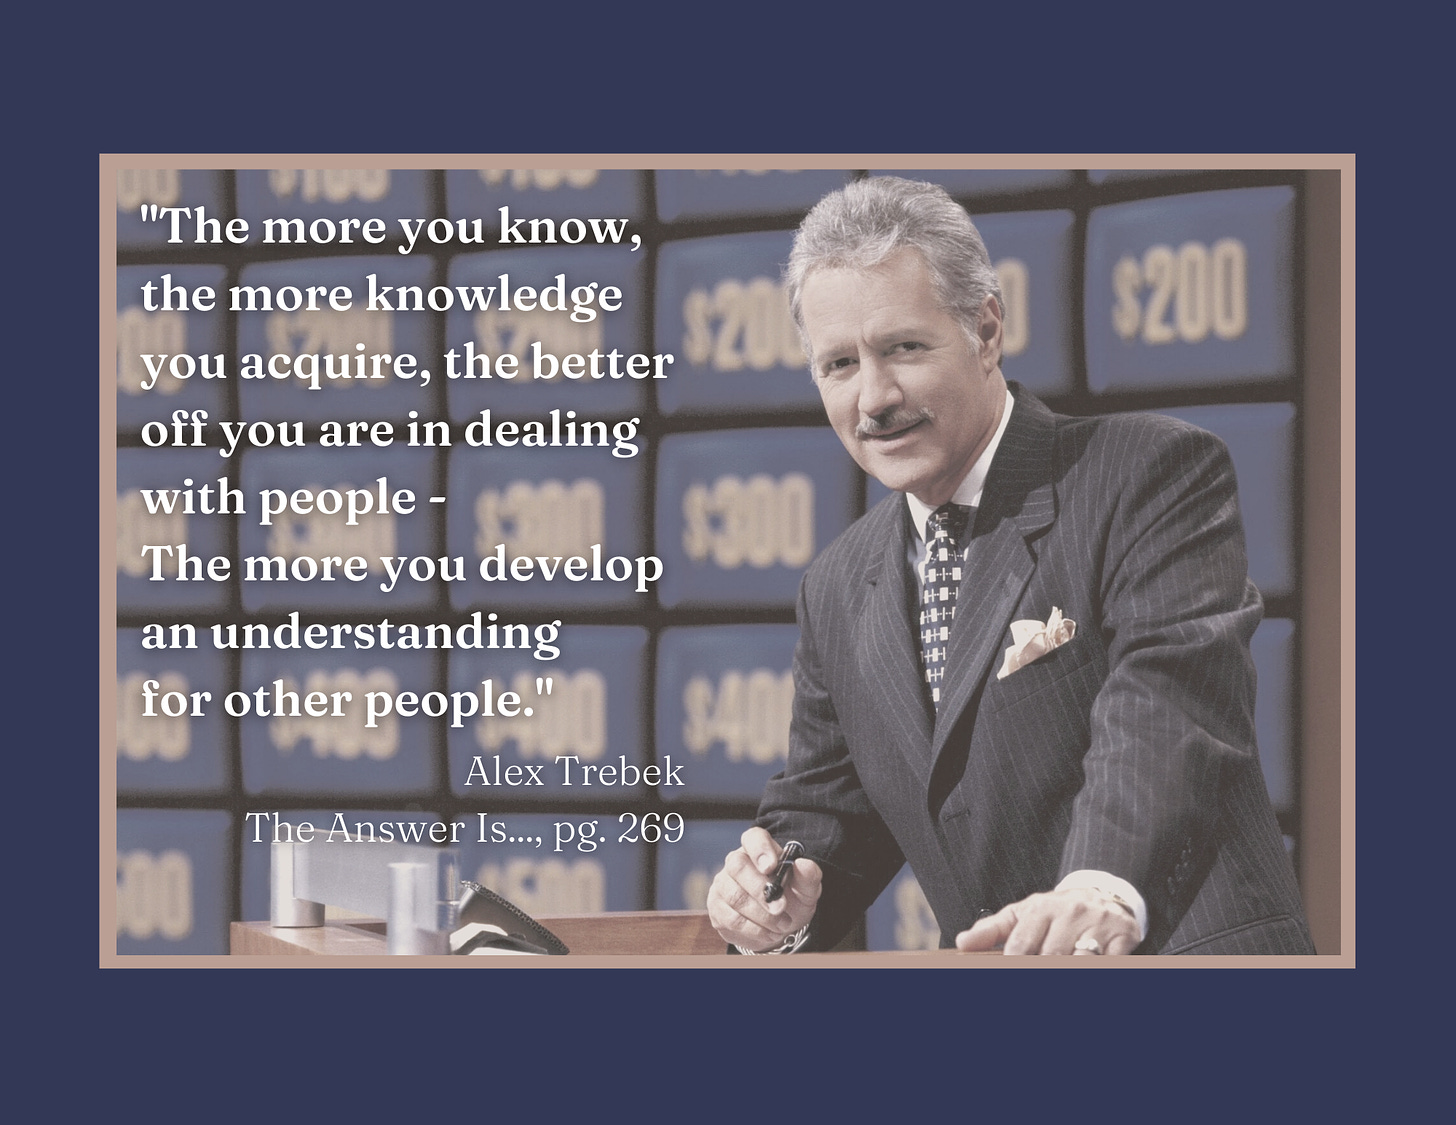 "The more you know, the more knowledge you acquire, the better off you are in dealing with people - The more you develop an understanding for other people." Alex Trebek. The Answer Is..., pg. 269